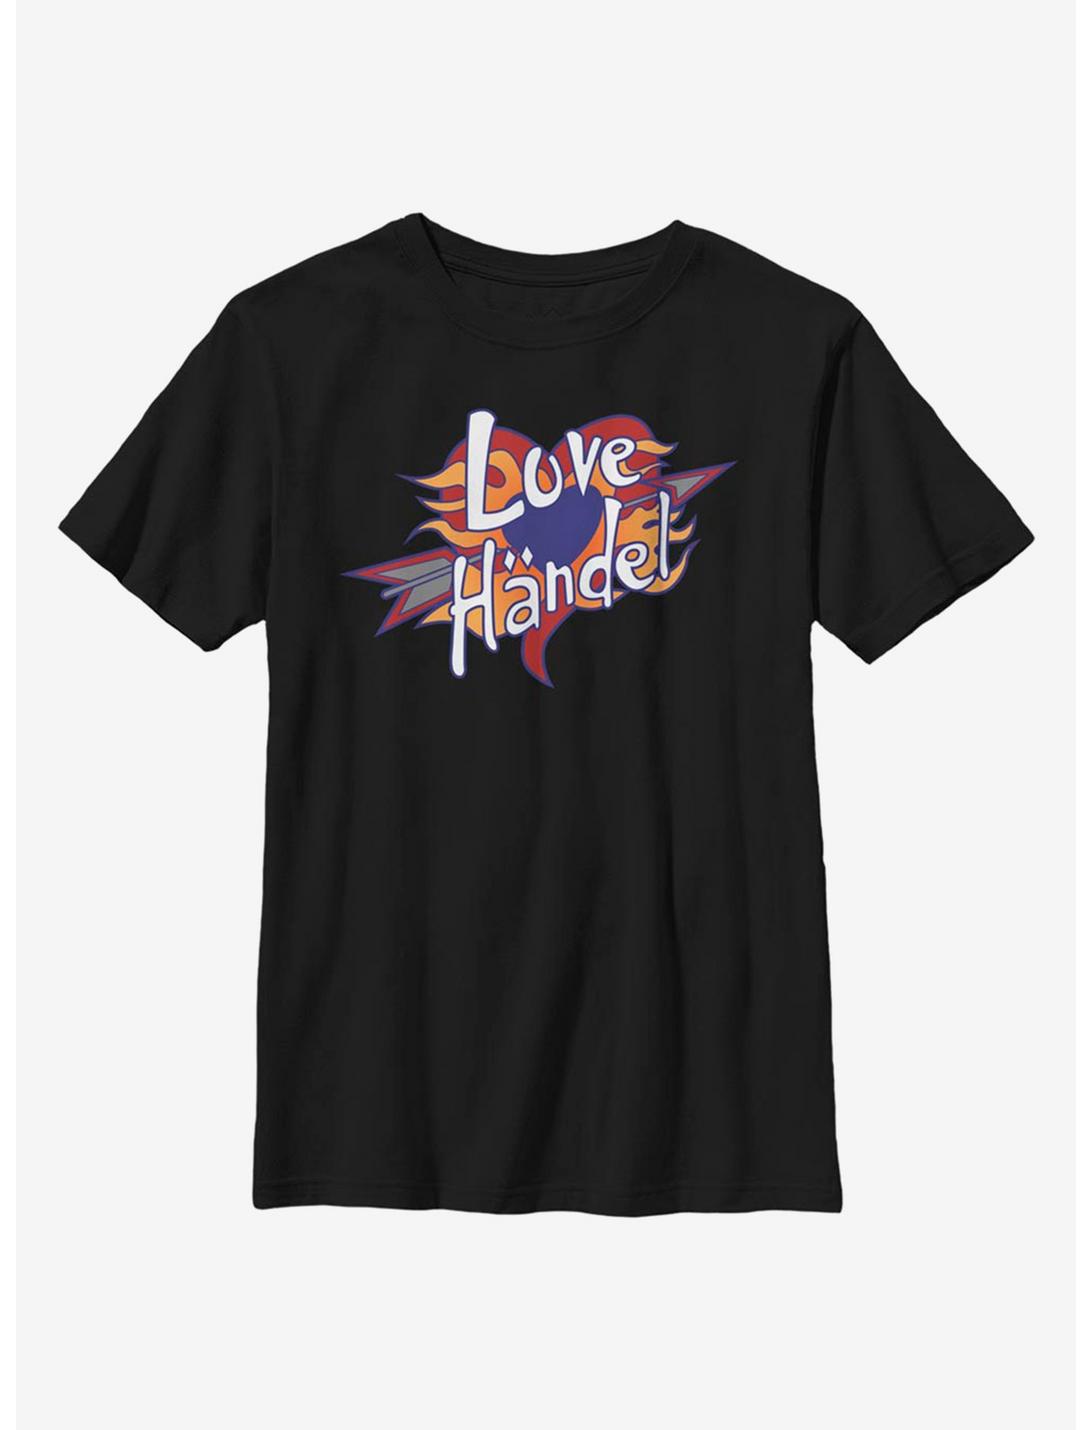 Disney Phineas And Ferb Love Handel Youth T-Shirt, BLACK, hi-res